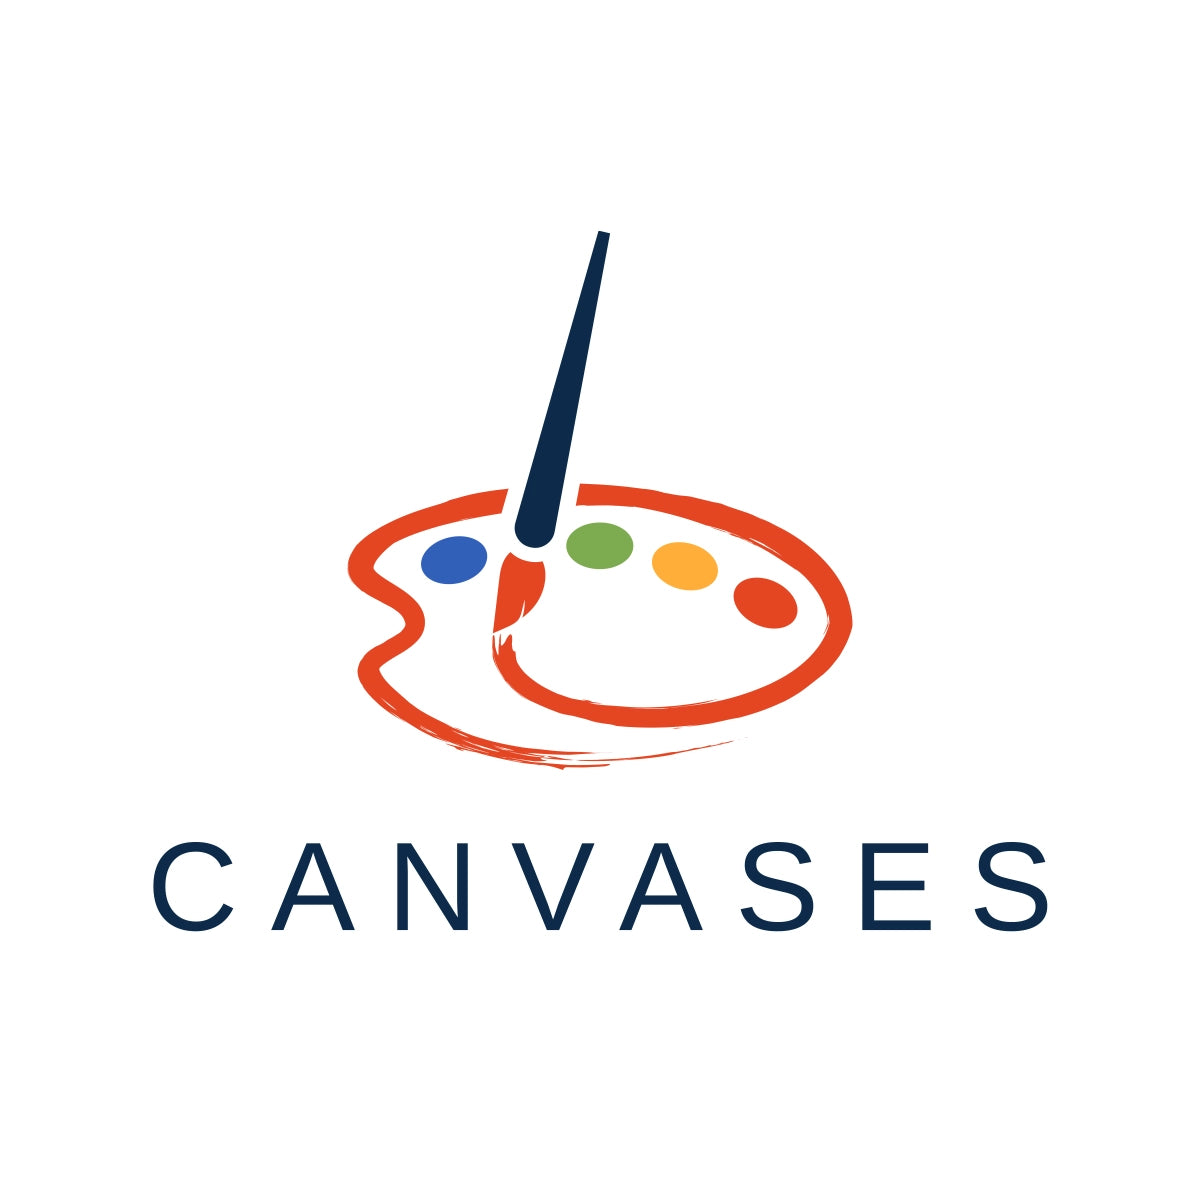 thecanvases.com